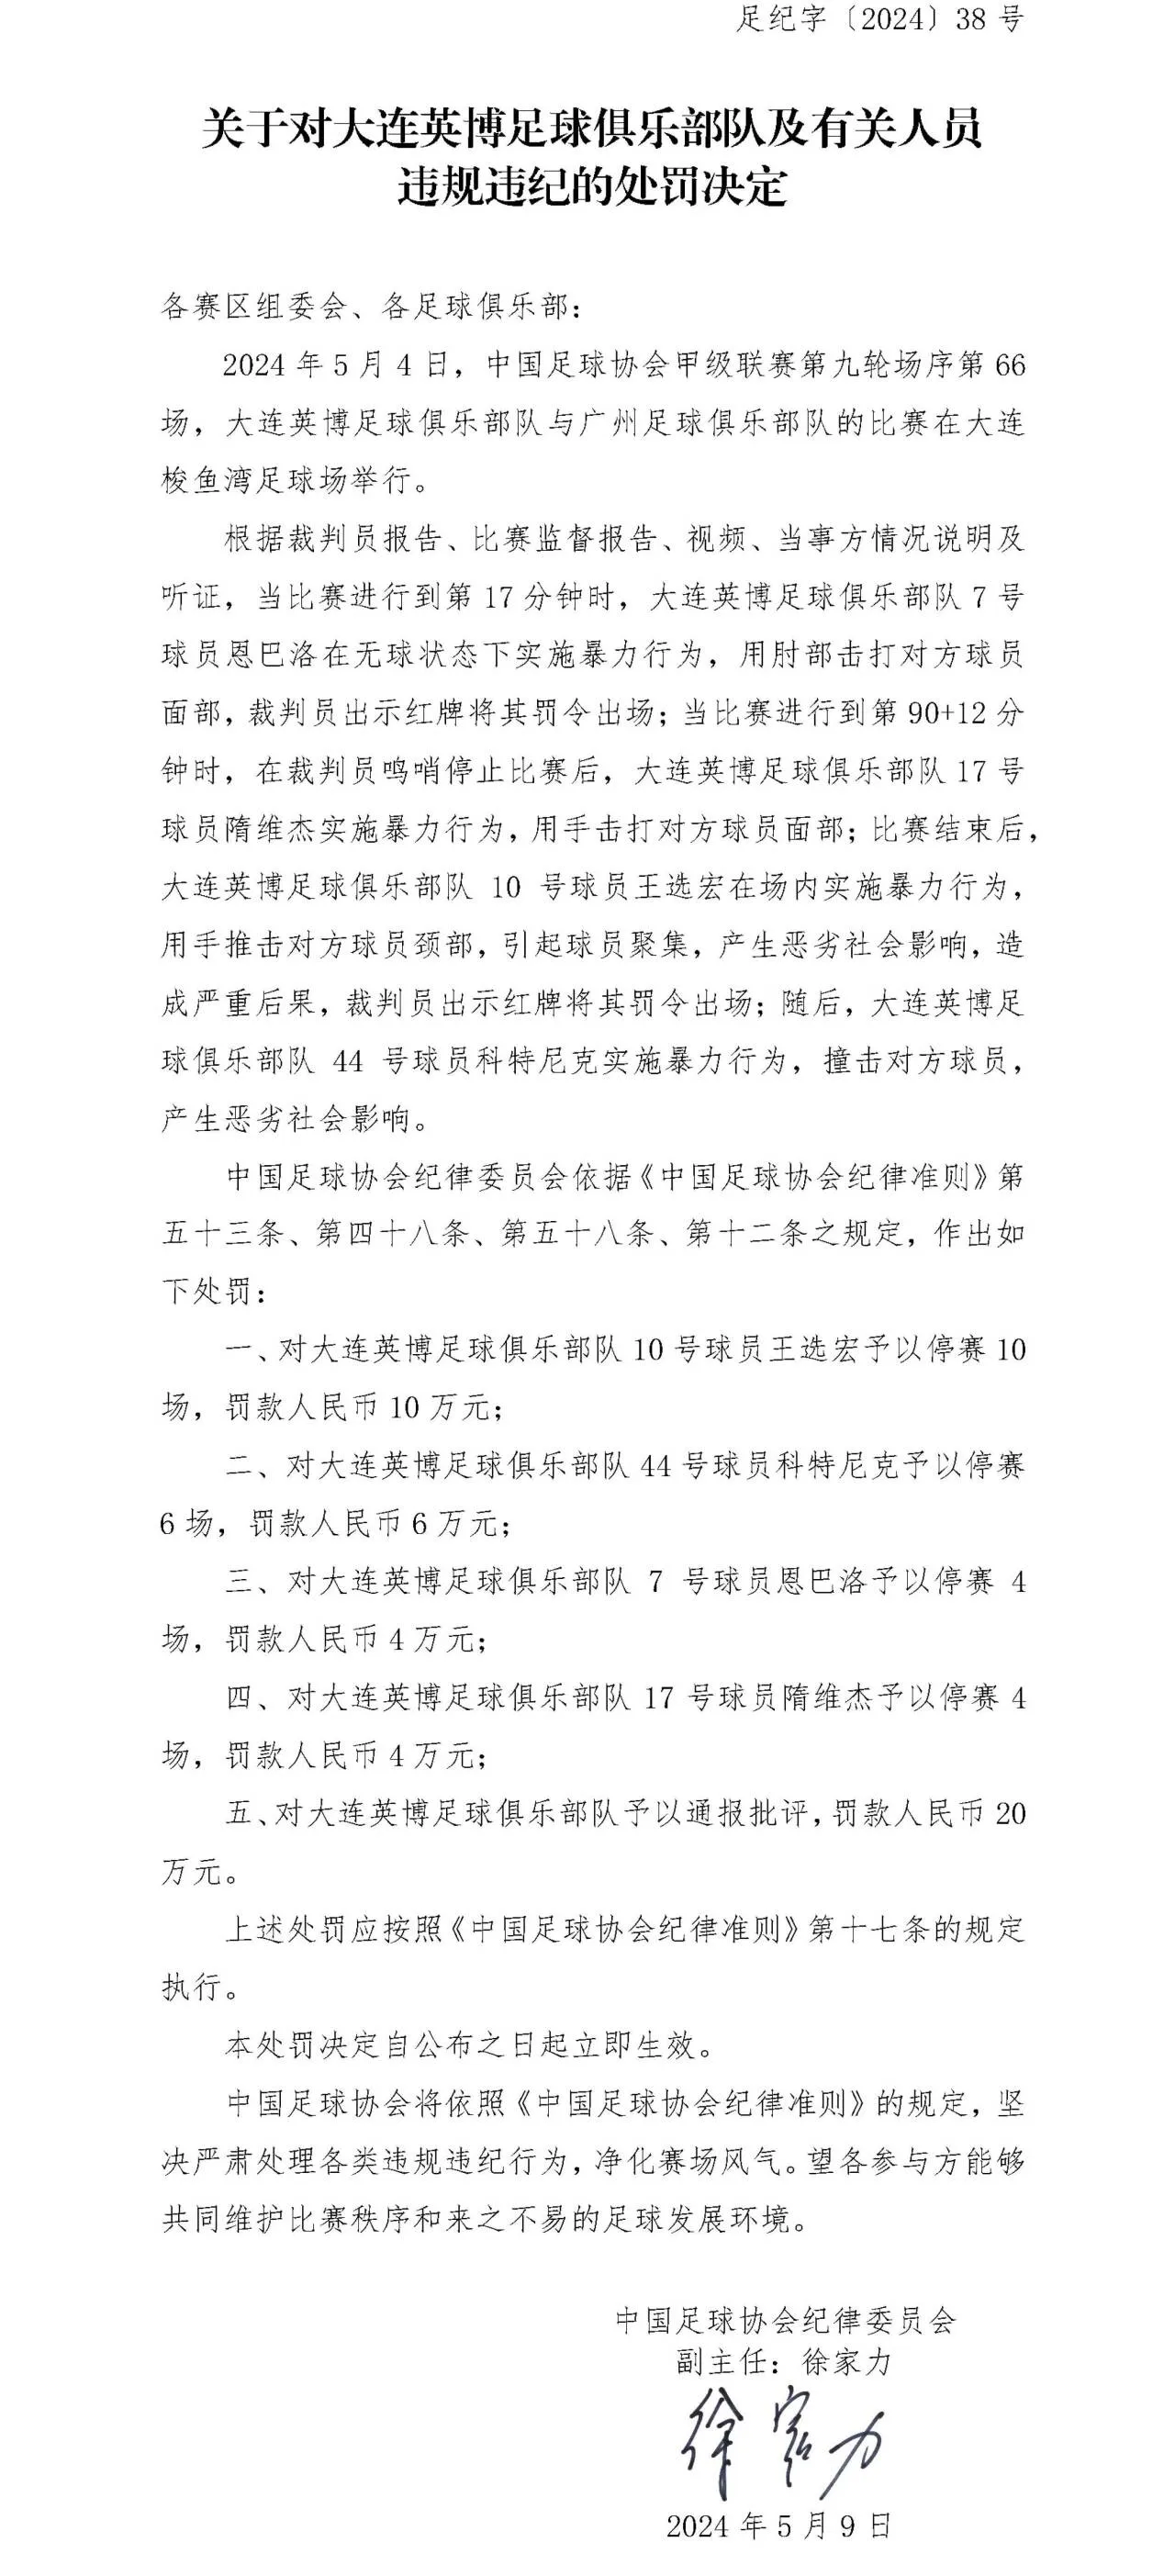 One person from the Guangzhou team was suspended for 4 games and fined 40,000 yuan. The Chinese Football Association issued a heavy fine: 4 players from Dalian were suspended and fined 440,000 yuan.